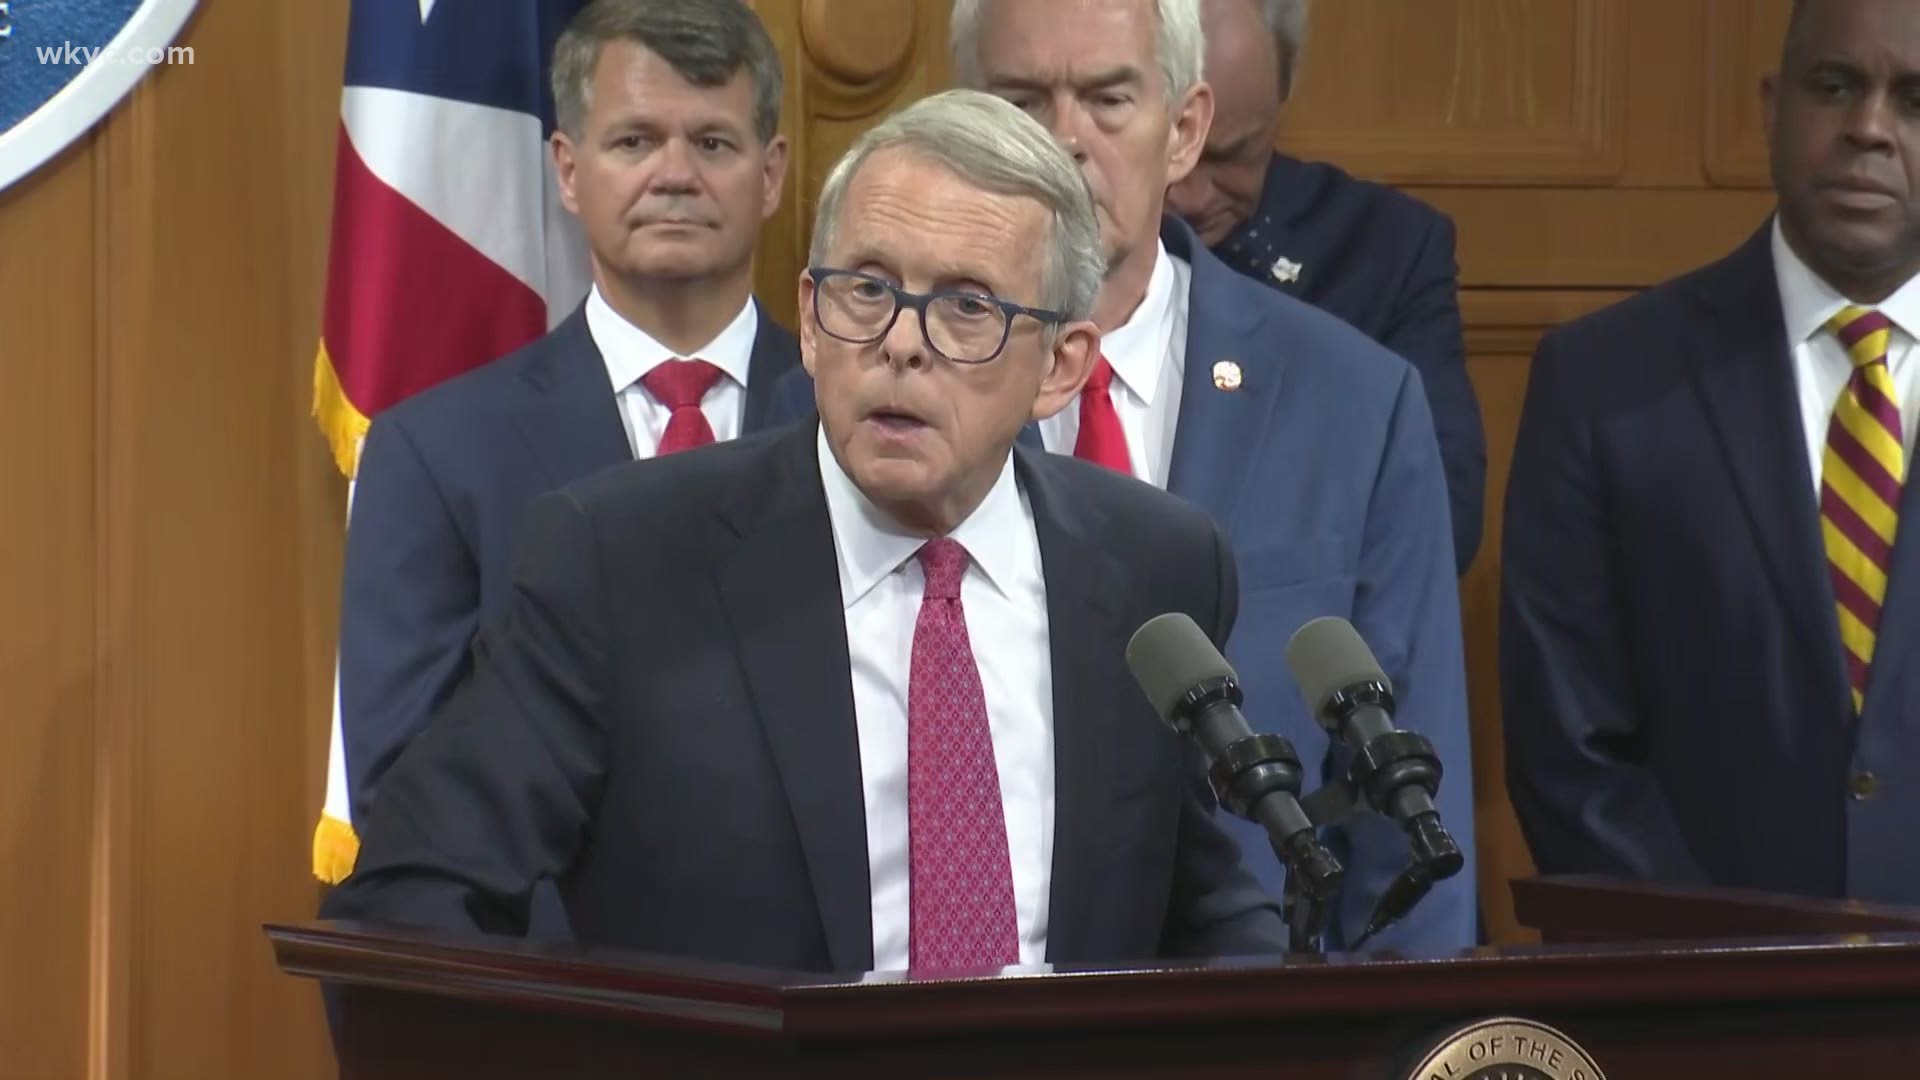 Ohio Governor Mike DeWine said on Monday that he won't be issuing a mask mandate for schools in the state despite rising coronavirus numbers.